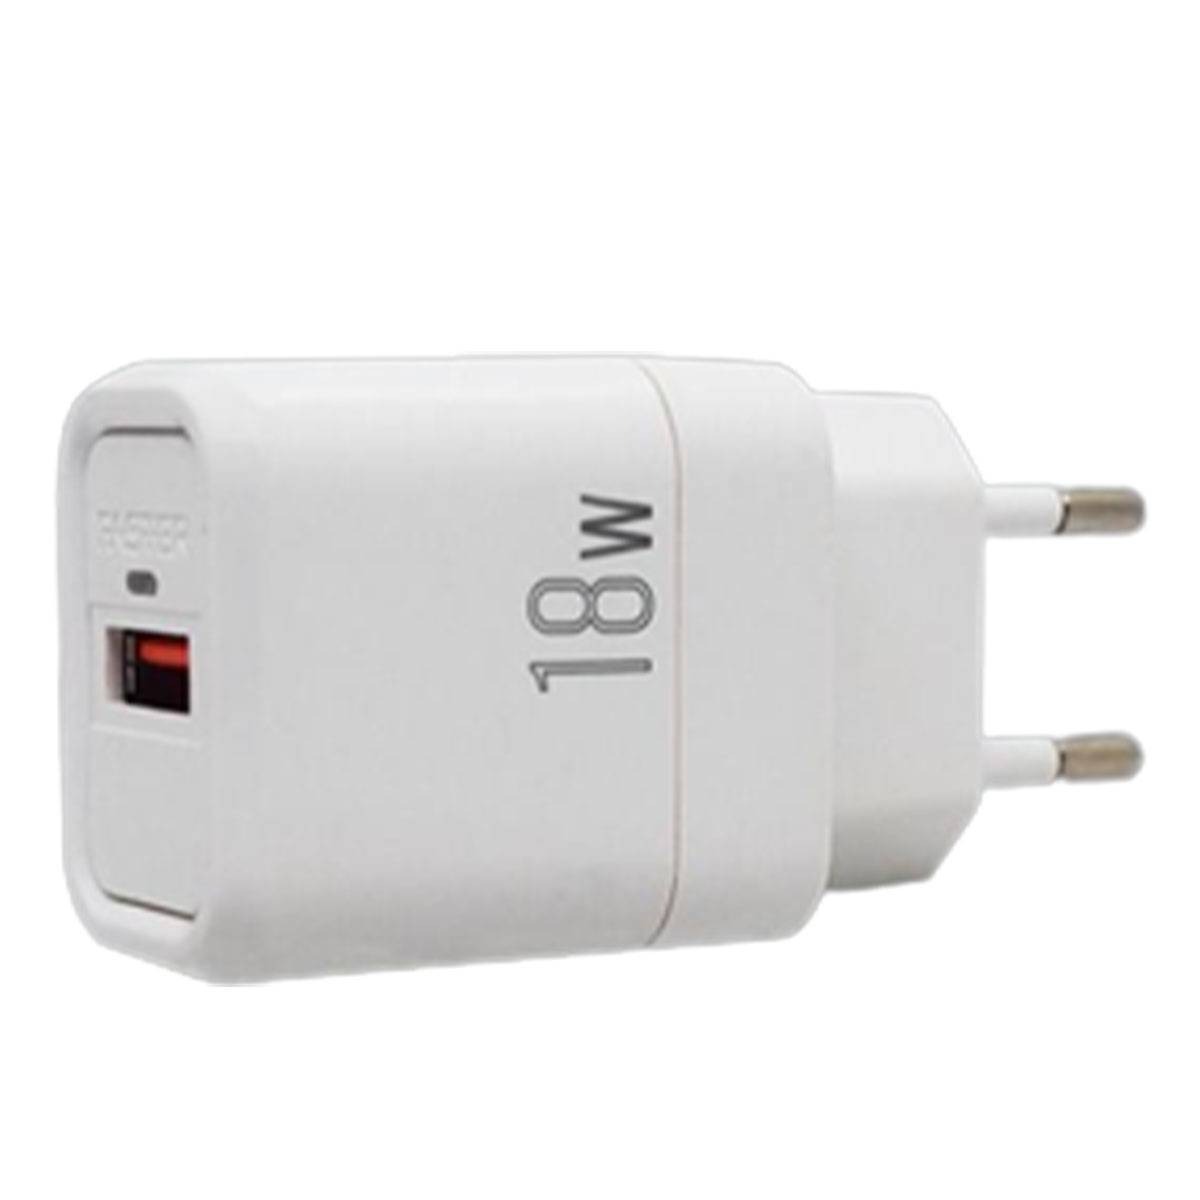 Faster 18W Charging Wall Adapter (FC-58)